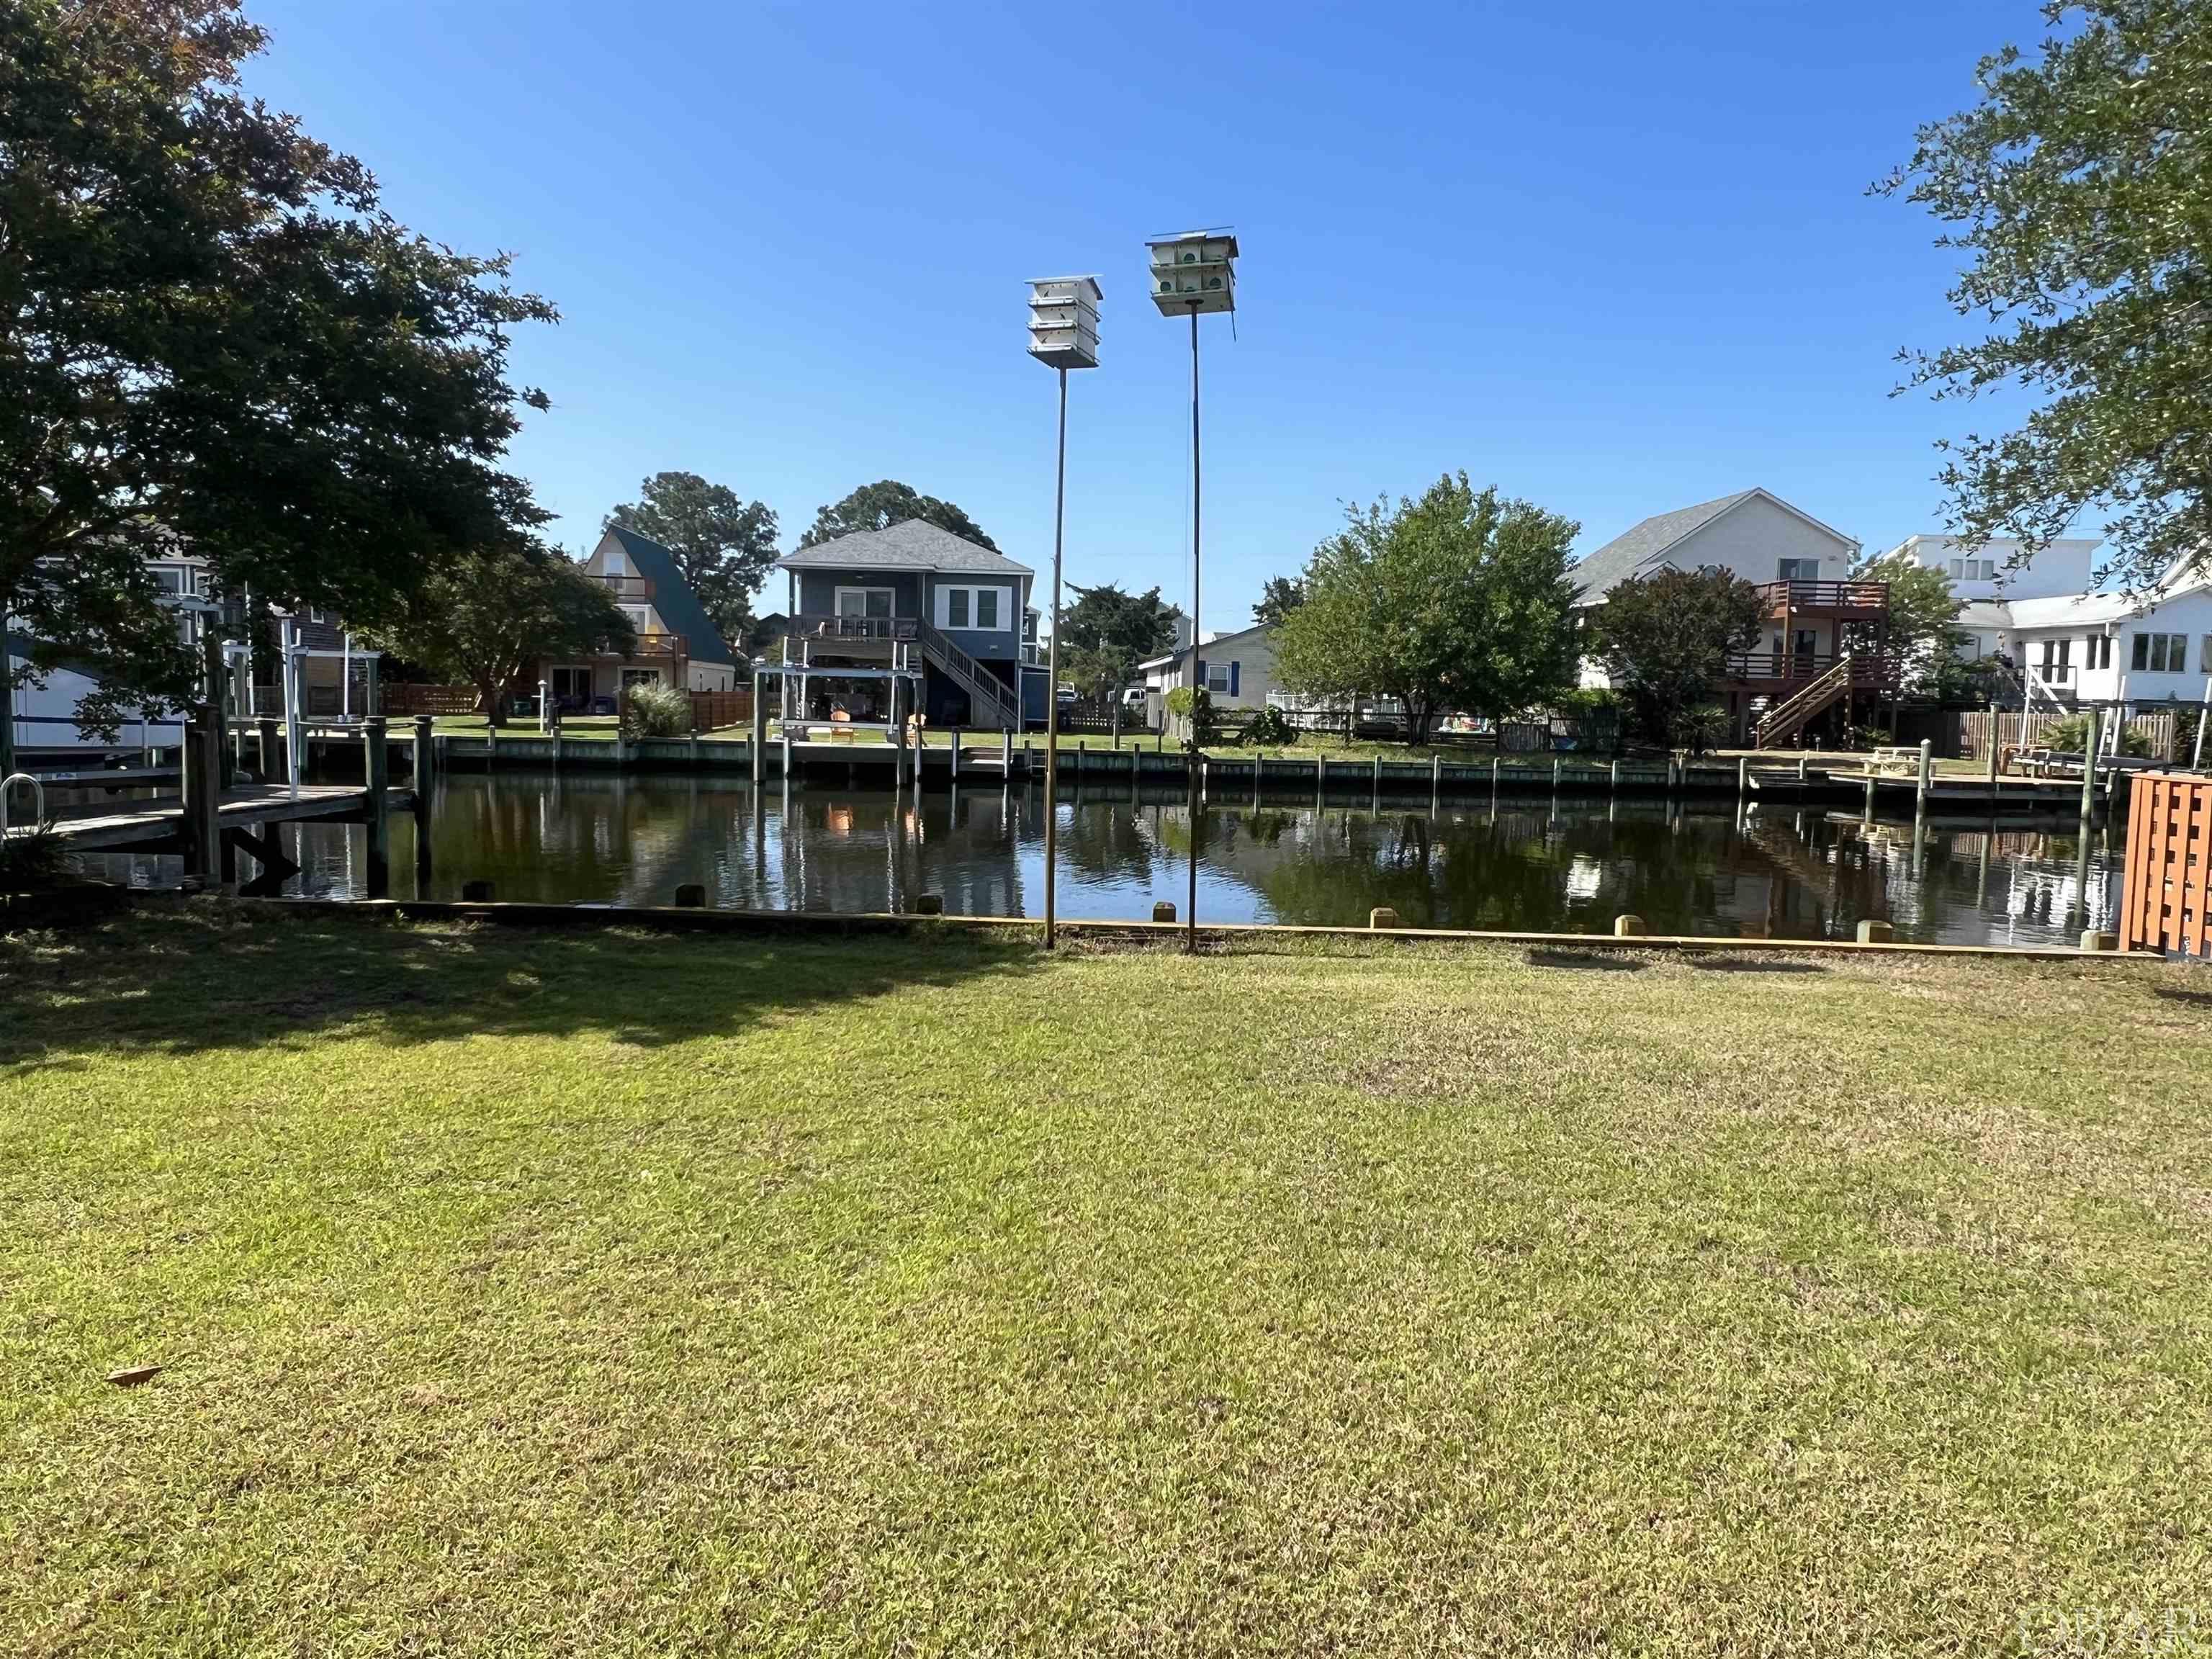 Wonderful CANALFRONT building site in boating community of Colington Harbour!  44 feet of BULKHEADED DEEP WATER CANAL FRONTAGE ON WIDE CANAL!  LEVEL & CLEAR WITH FILL ADDED!  Build your dream home and enjoy fabulous views of Corsair Inlet!  PRIME waterfront location w/southern exposure & easy access to the Albemarle Sound by boat!  The sellers added several truck loads of fill when they purchased!